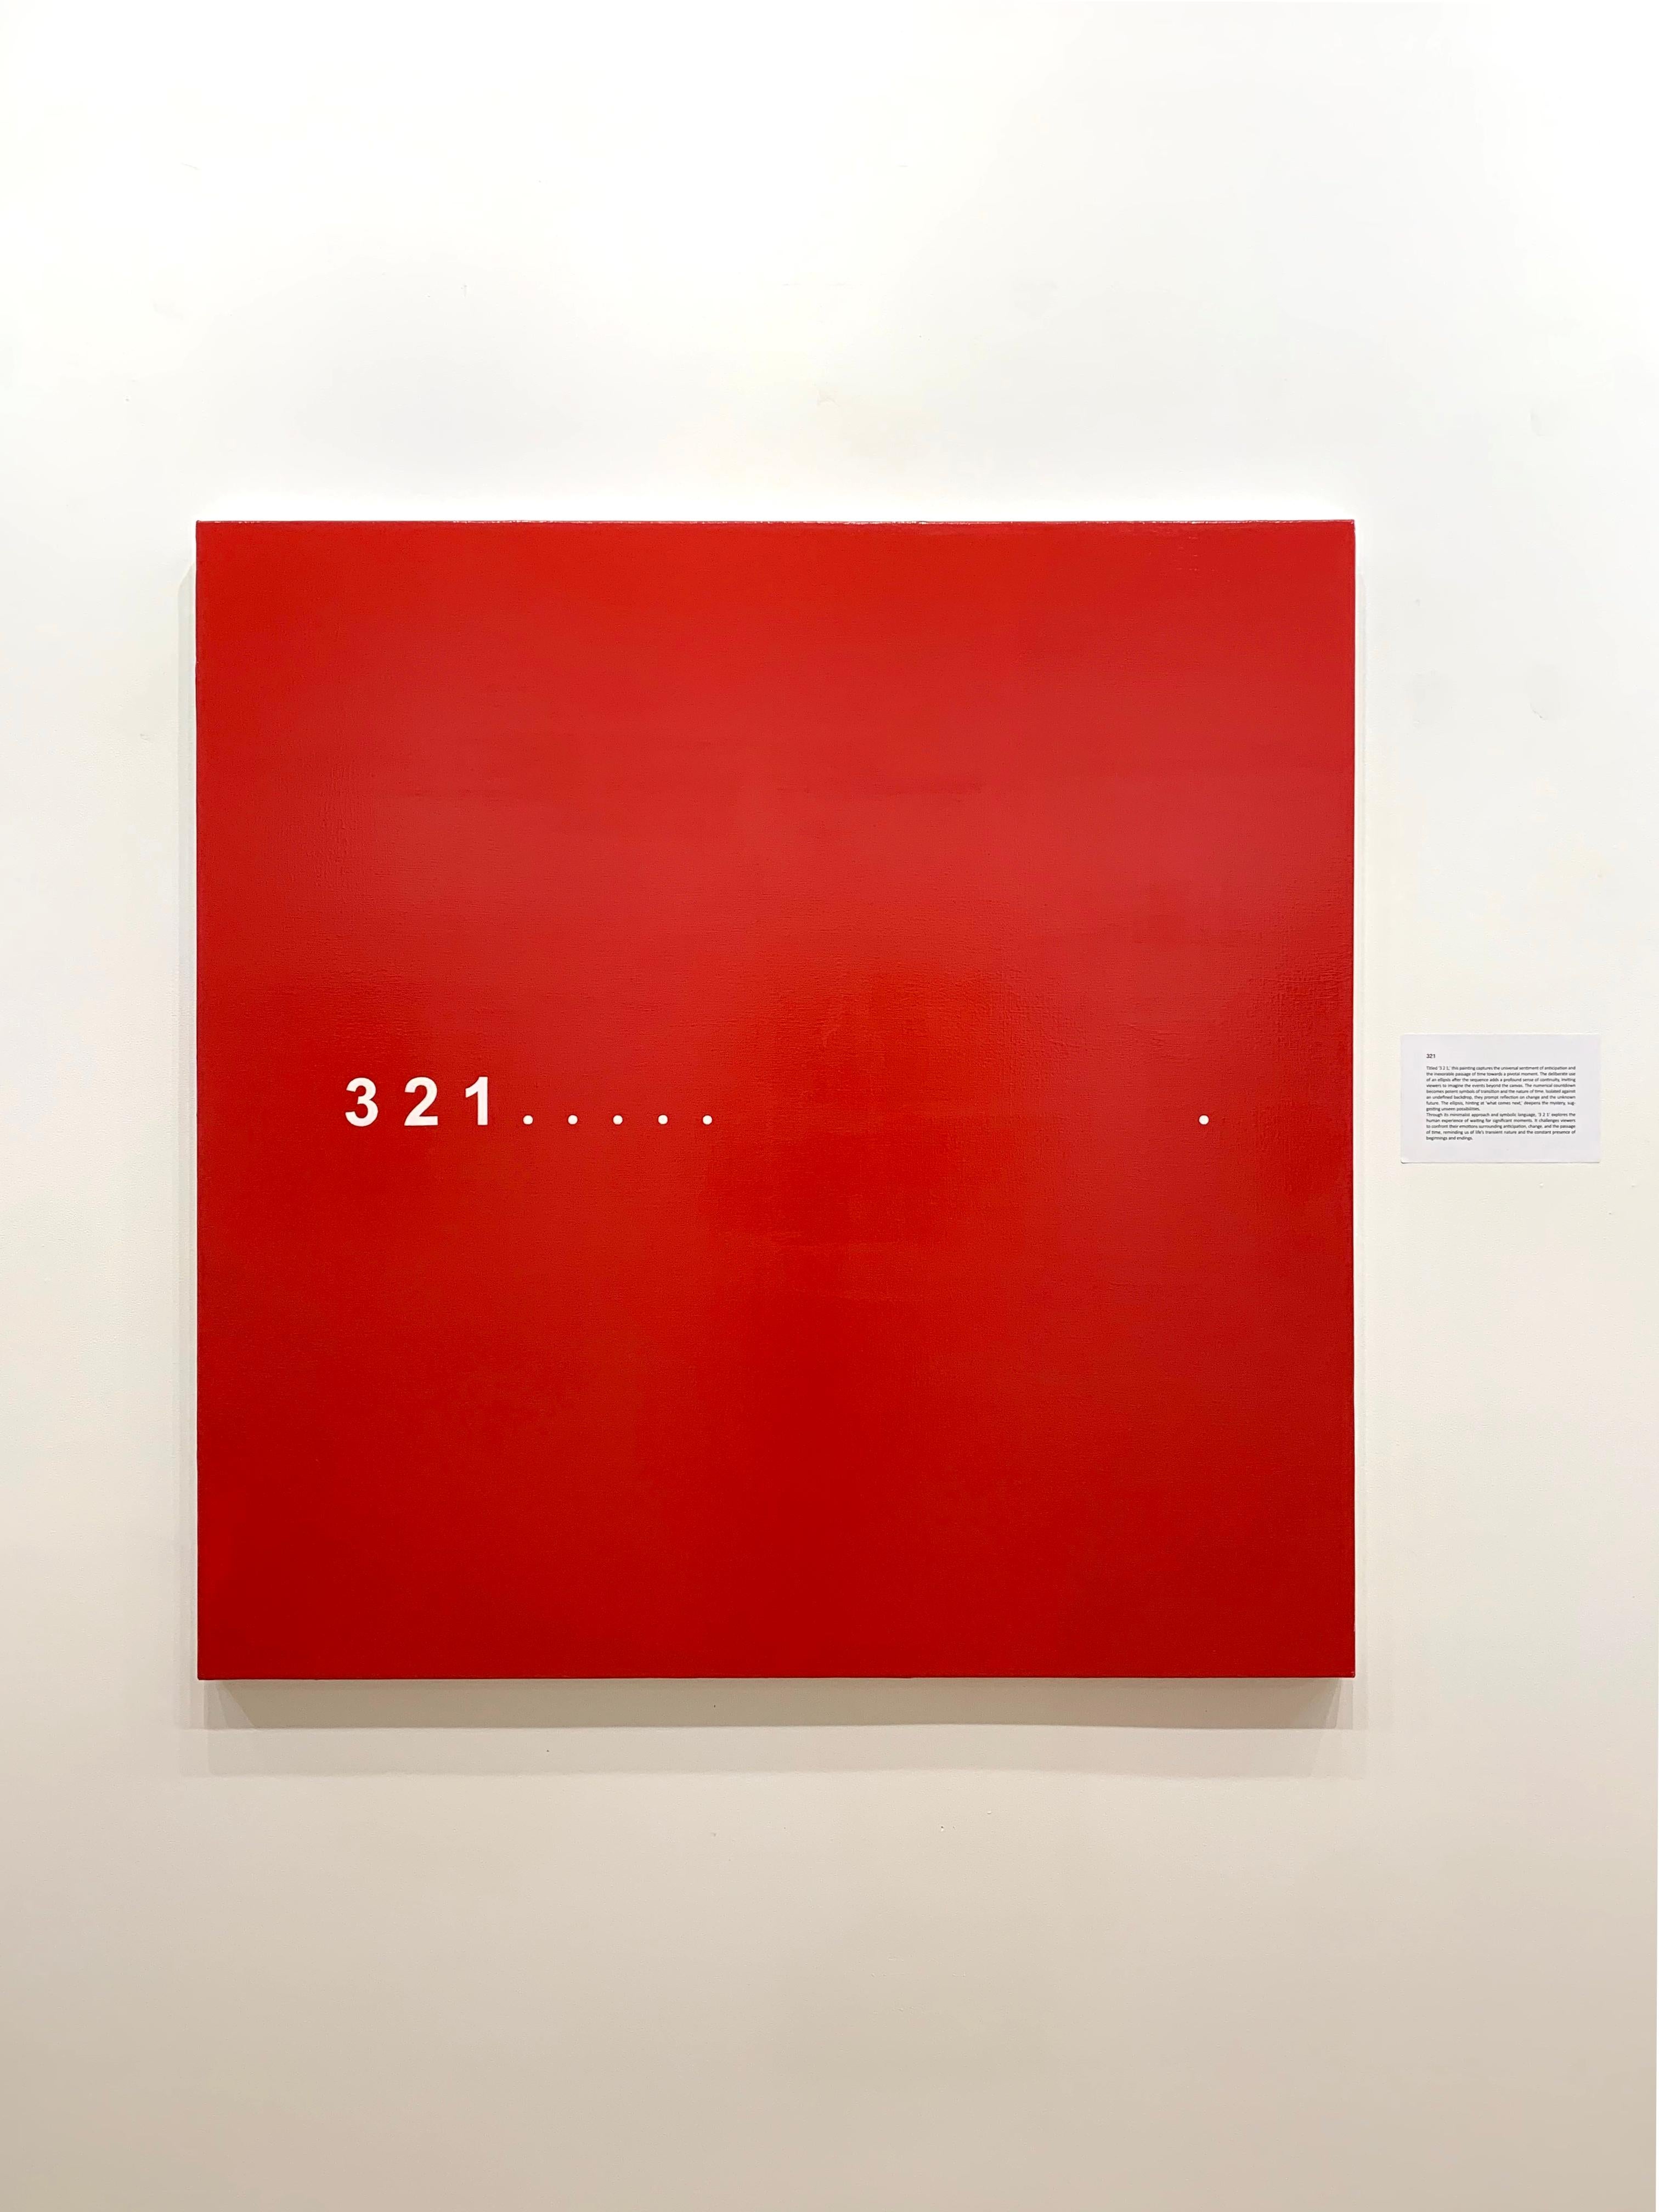 321 - Painting by Stephen Bezas